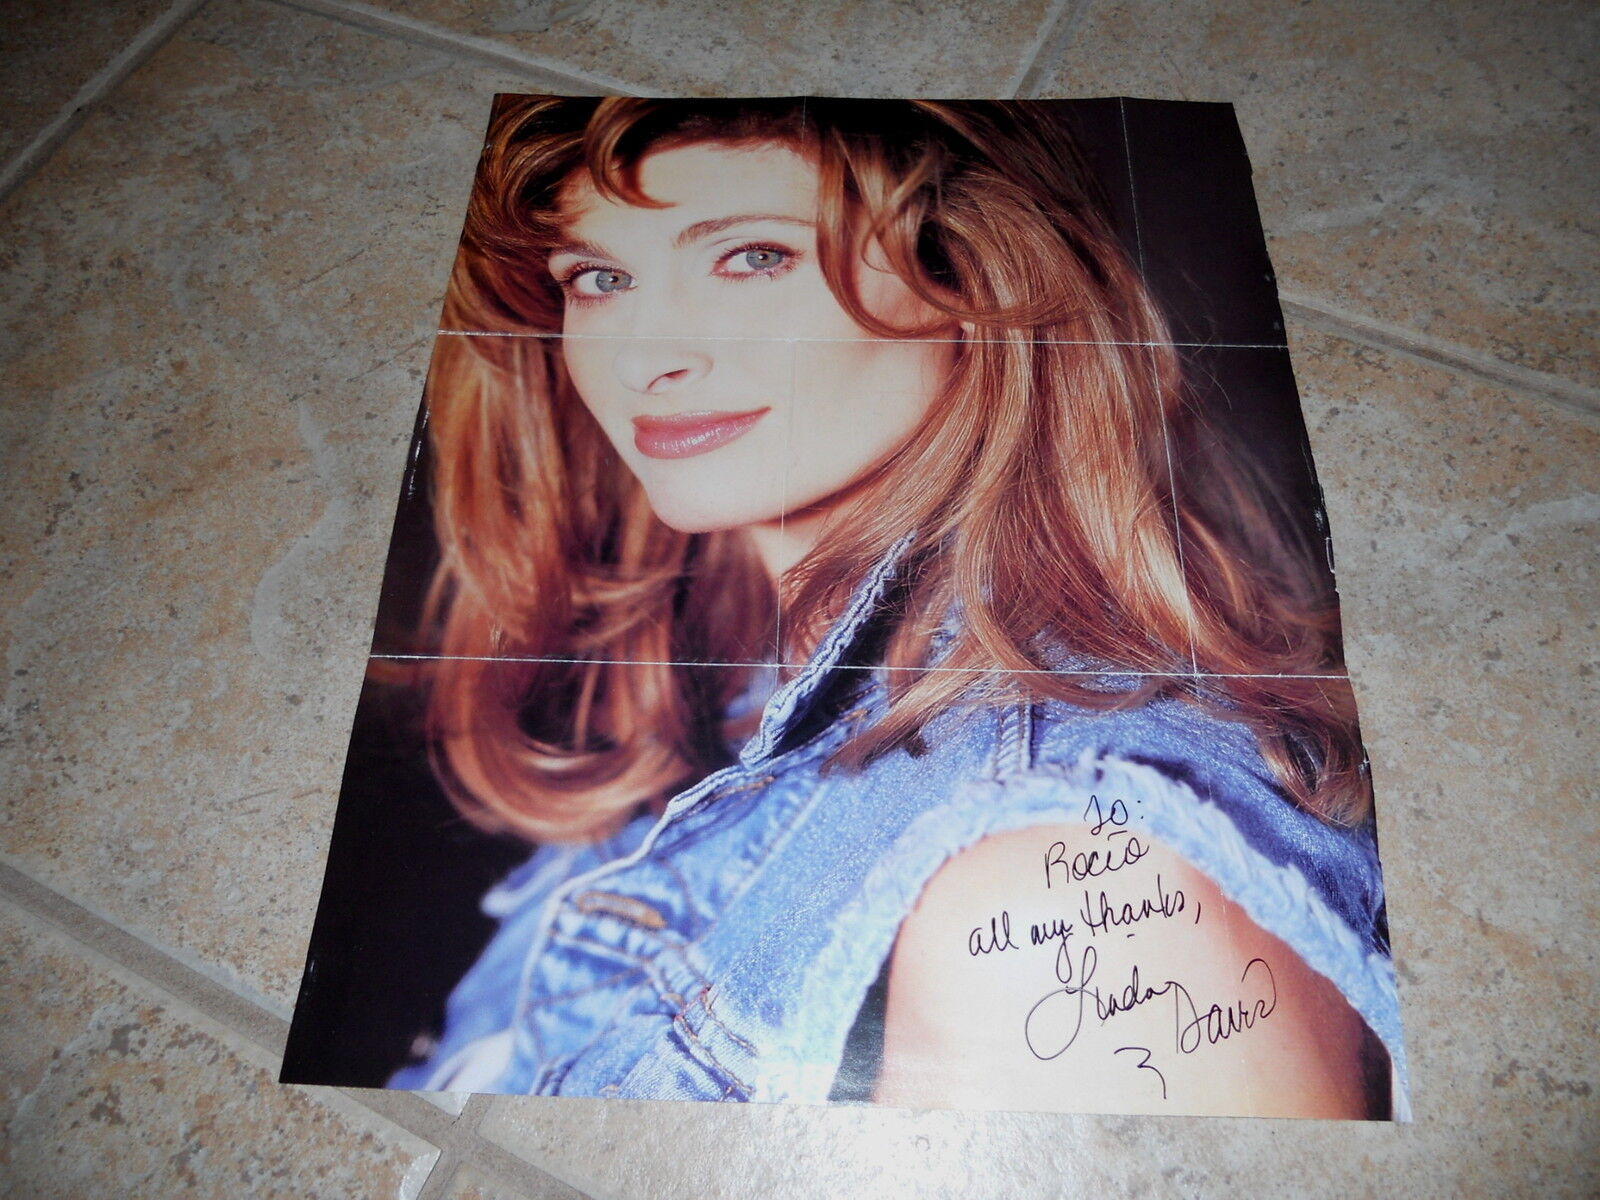 Linda Davis Signed Autographed Shoot For The Moon CD Poster Insert Photo Poster painting